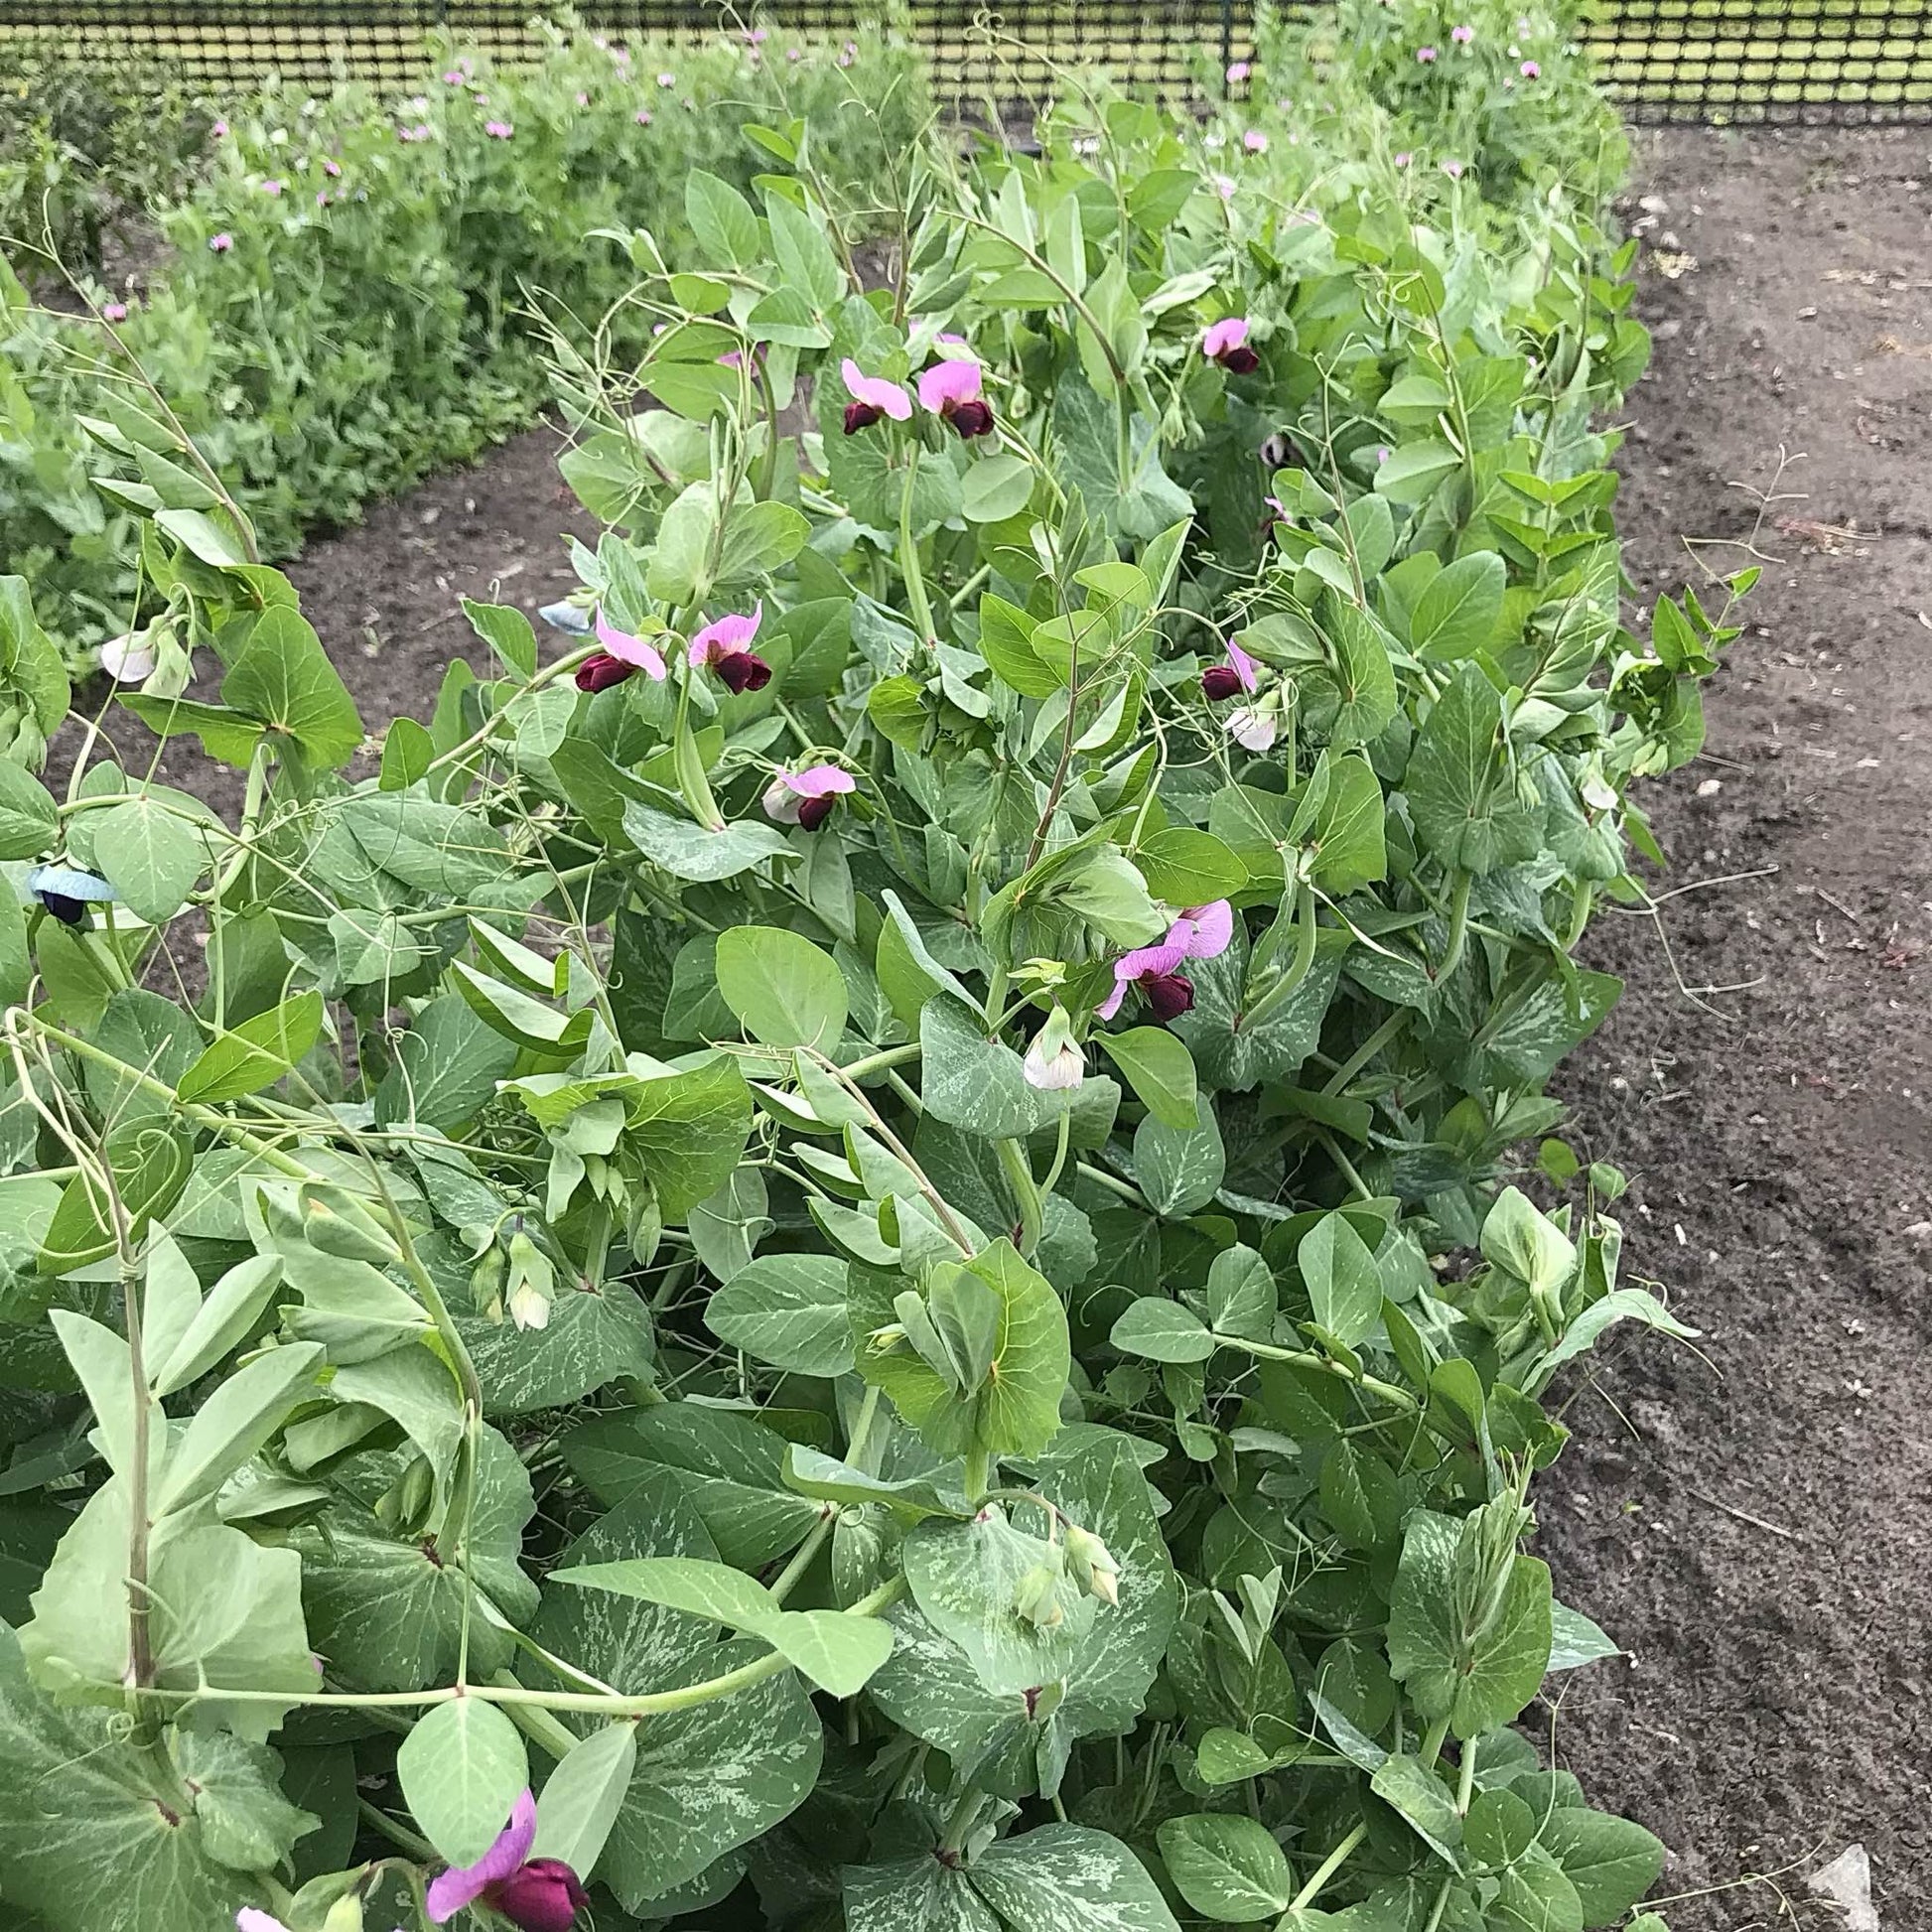 looking down a bed of snow pea plants